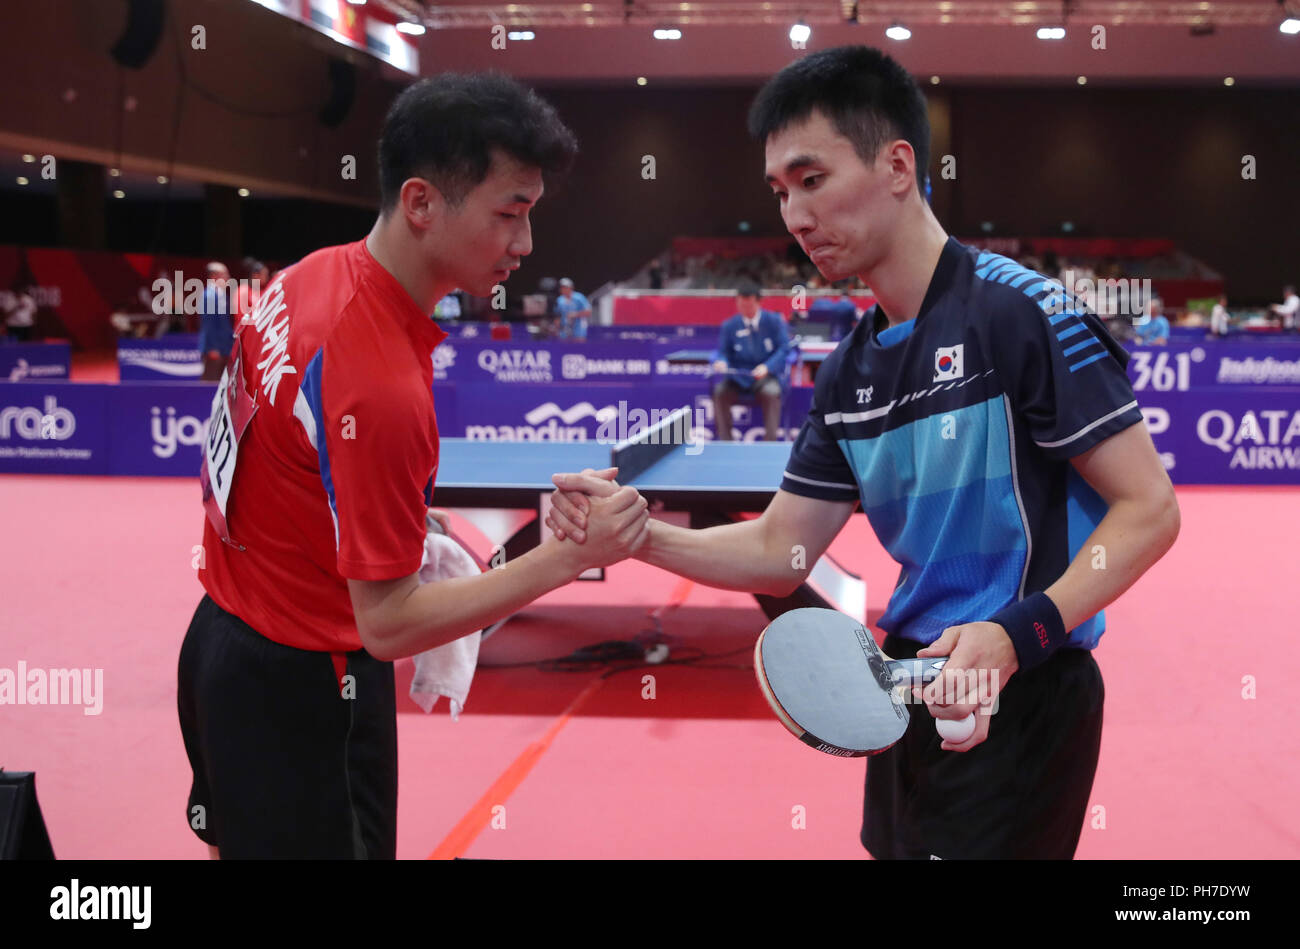 Seoul, South Korea. 31st Aug, 2018. Two Koreas compete in Asiad table tennis  South Korea's Lee Sang-su (R) and North Korea's Pak Sin-hyok shake hands  after ending their round of 16 singles